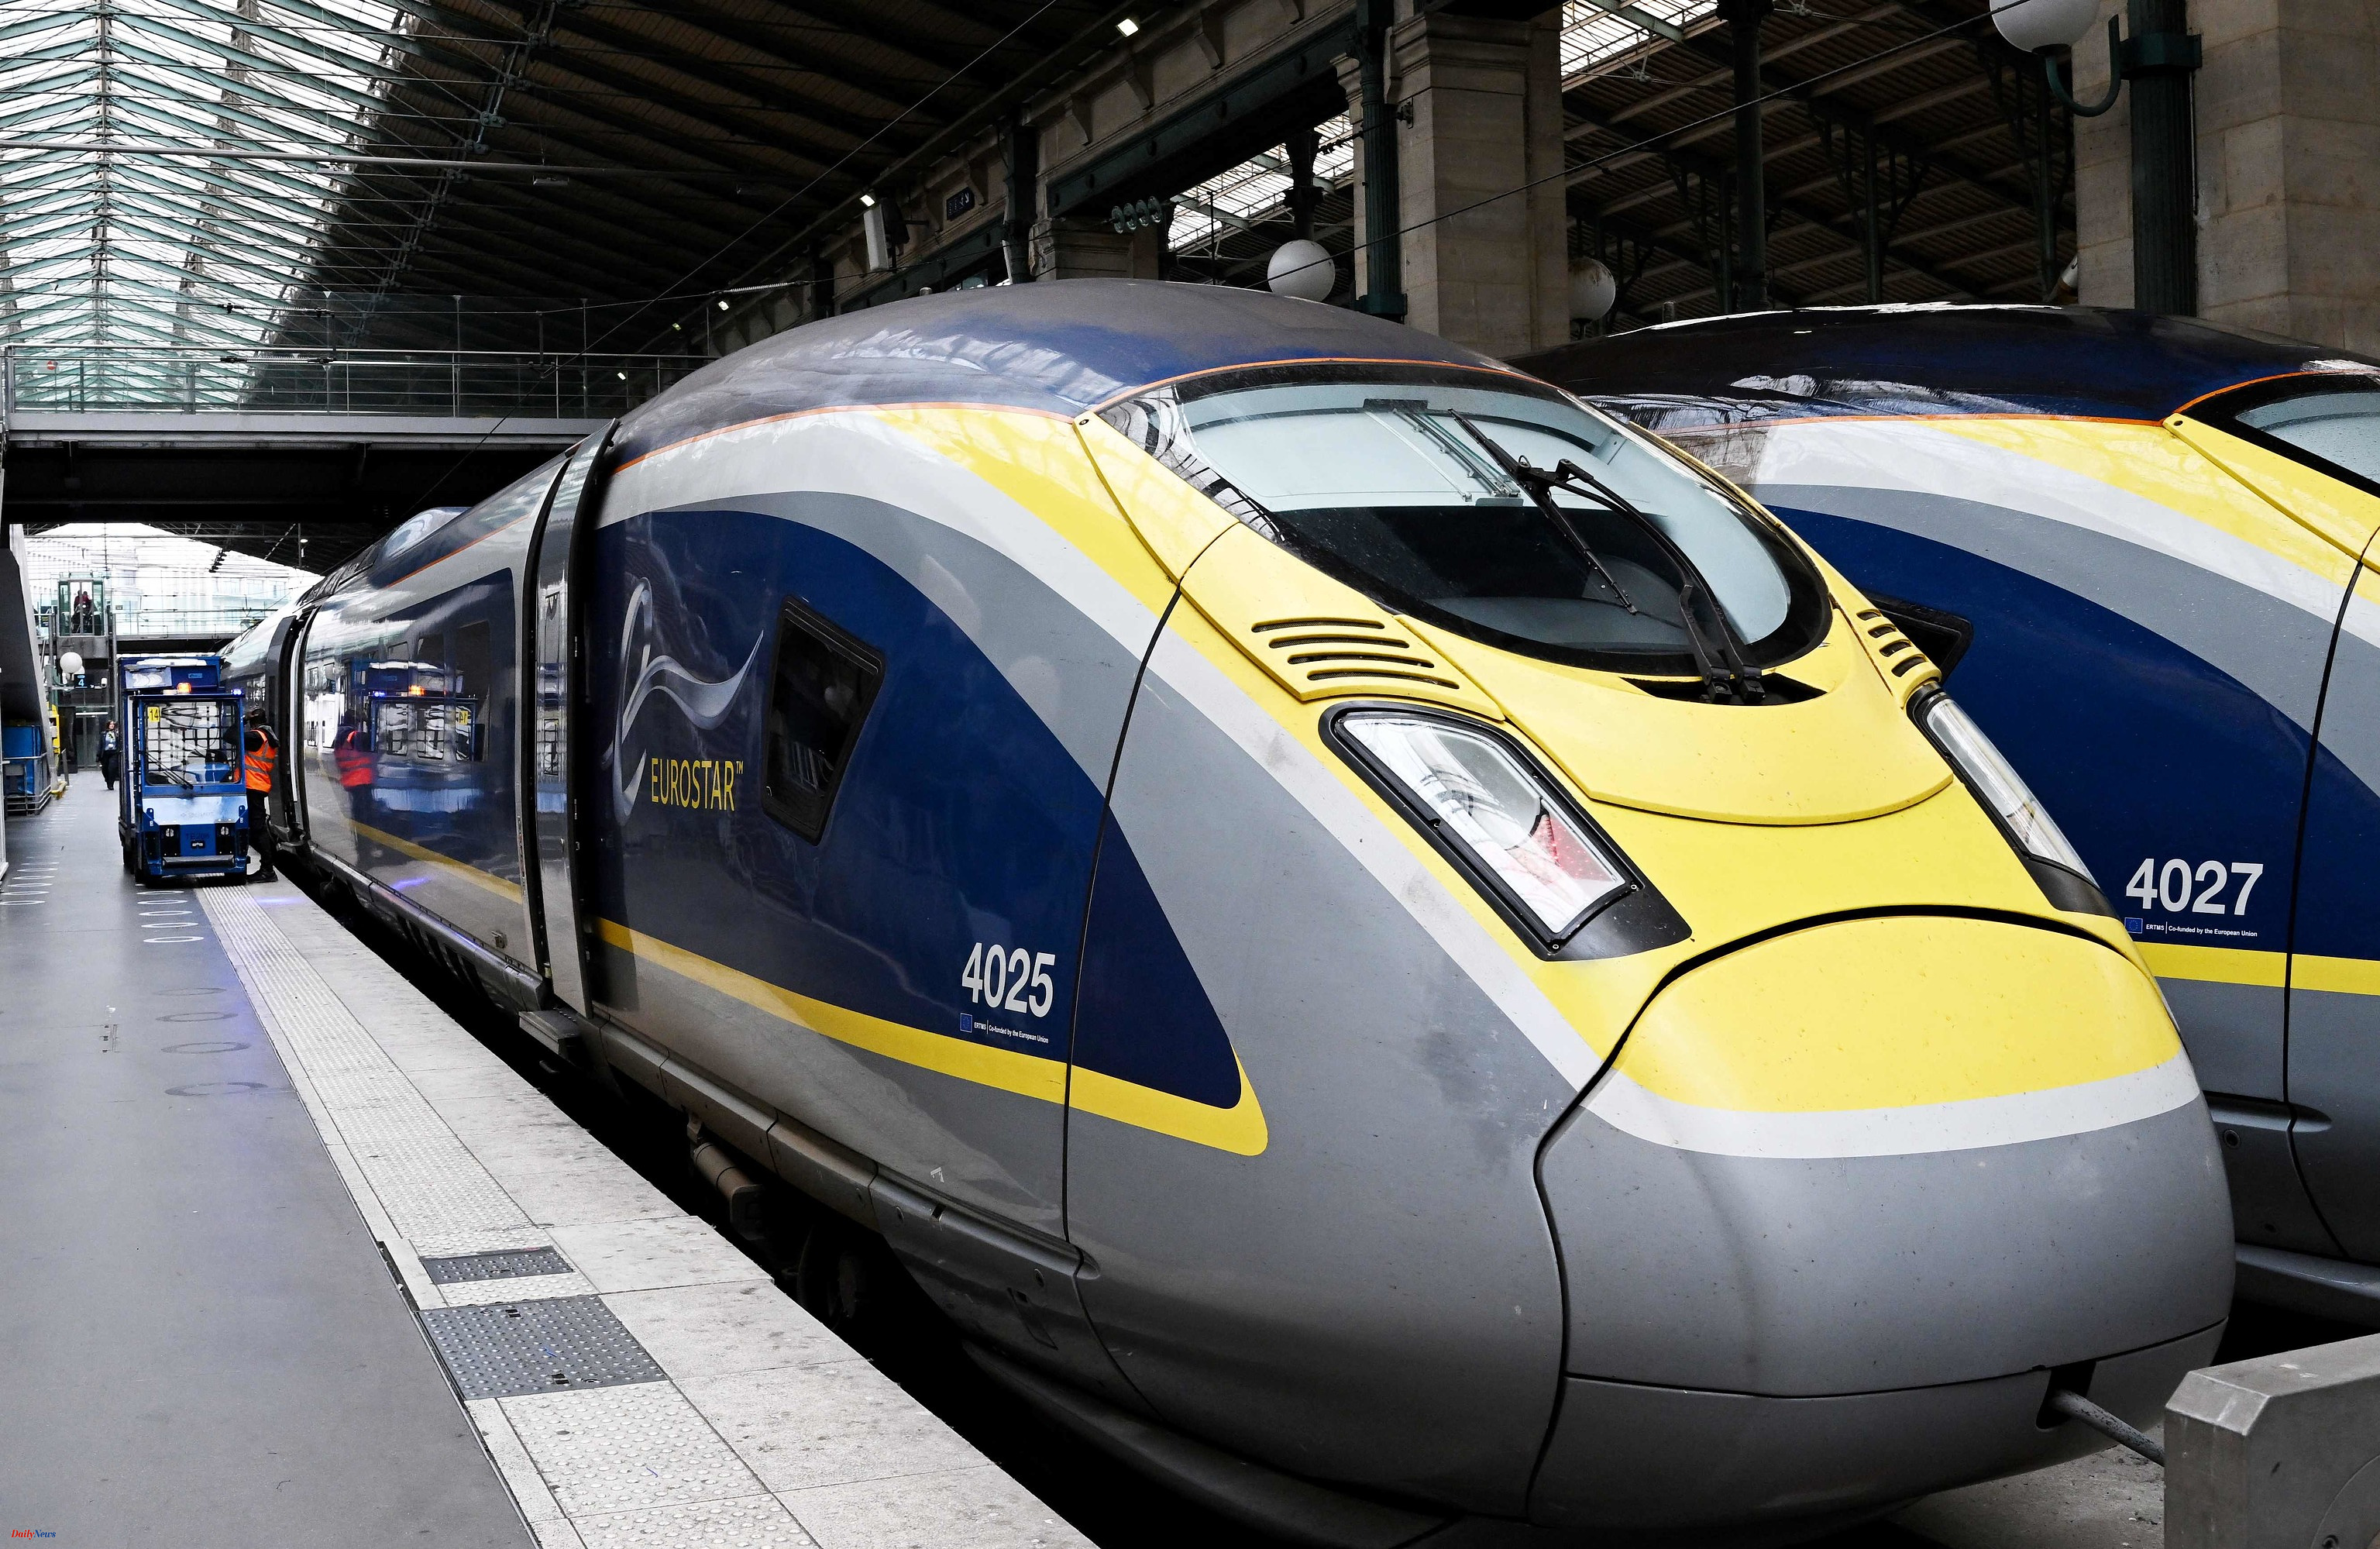 Eurostar transport cancels its trains to and from London due to a problem on the tracks